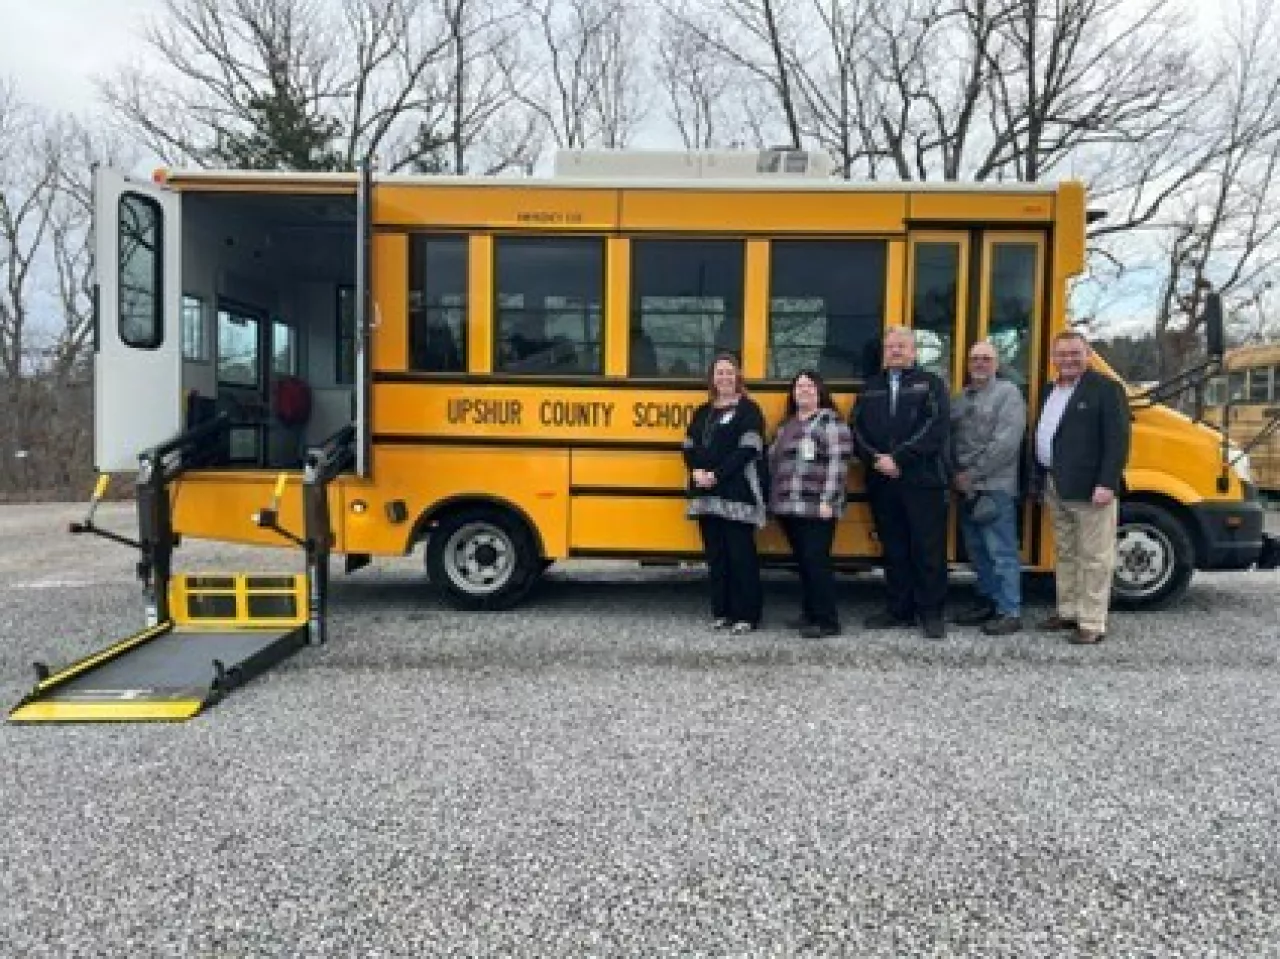 Upshur County Schools taking delivery of a GreenPower Nano BEAST all-electric purpose-built school bus. In the photo are Melinda Stewart, Interim Assistant Superintendent; Stephanie Bennett, Transportation Supervisor; Jeffrey Perkins, Business Manager; Rick Wentz, Chief Mechanic and GreenPower Motor Vice President Mark Nestlen img#1